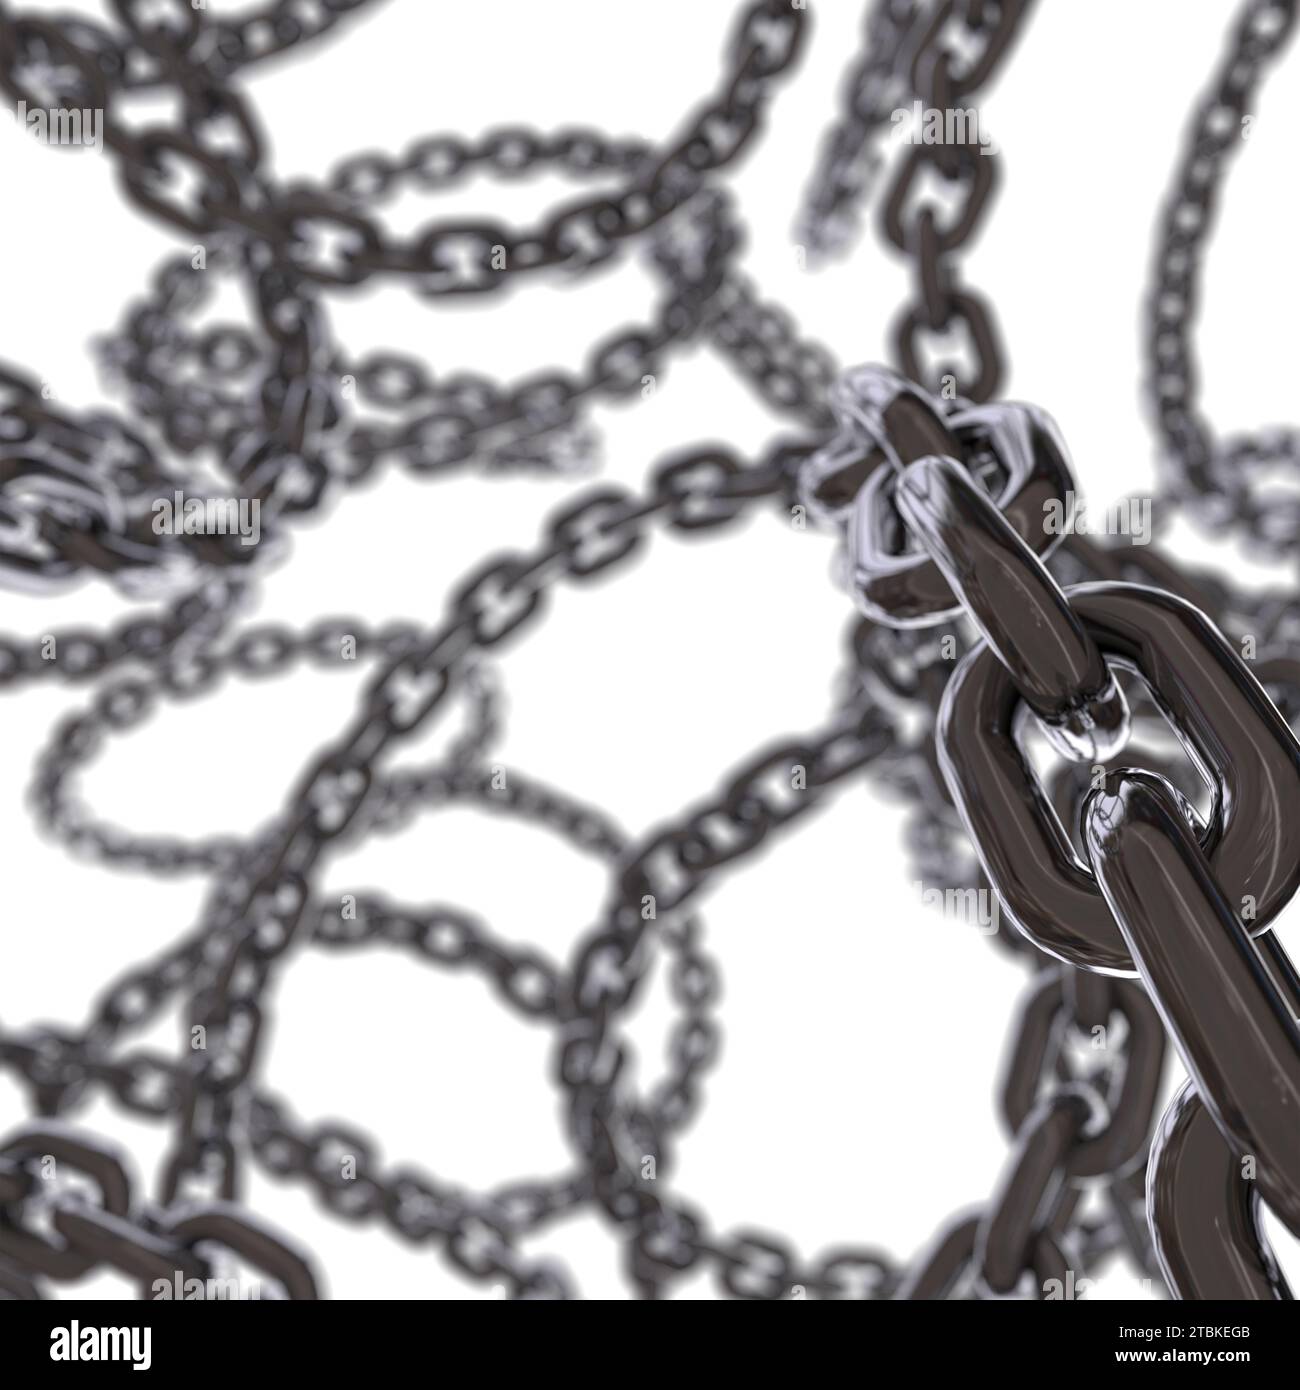 Intersecting 3d chrome metal chains swirling in the air render Stock Photo